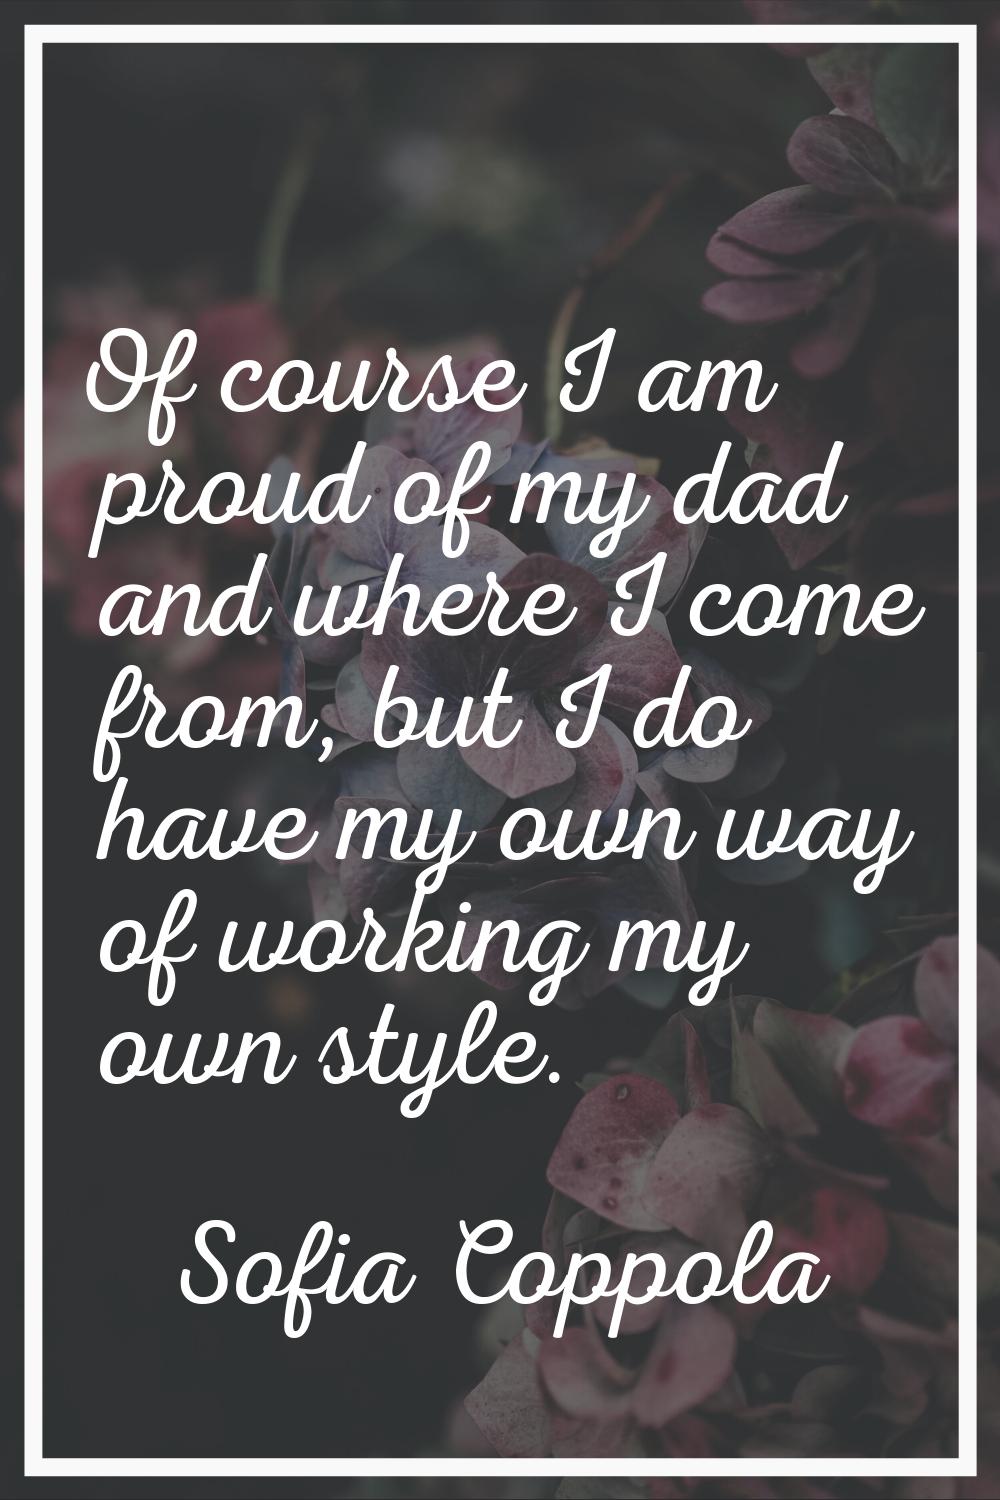 Of course I am proud of my dad and where I come from, but I do have my own way of working my own st